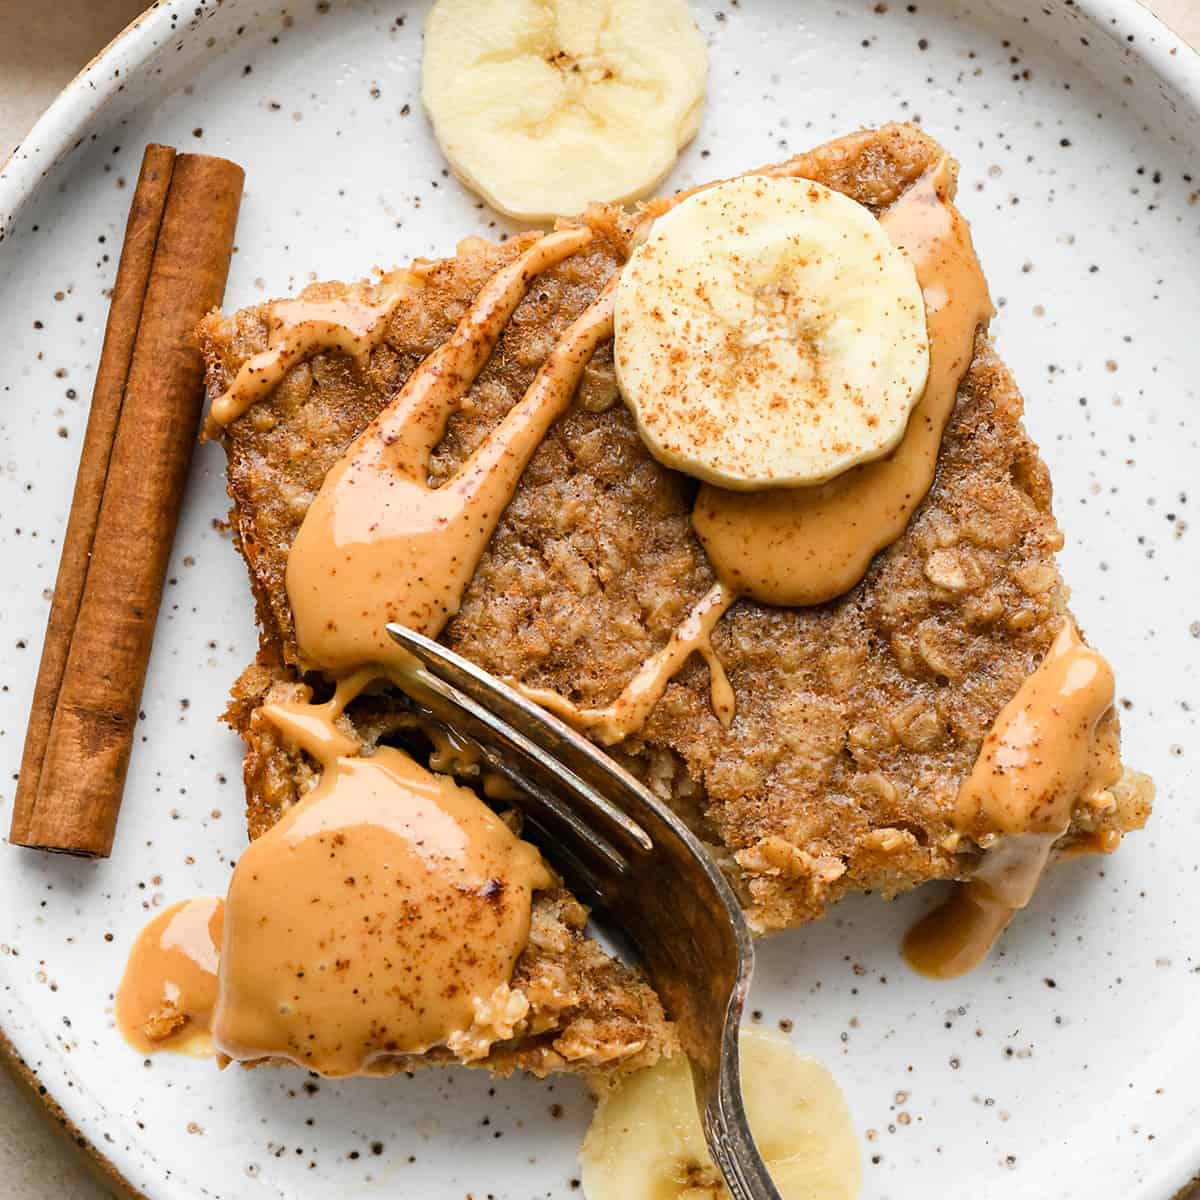 a fork taking a bite of a piece of Peanut Butter Banana Baked Oatmeal on a plate